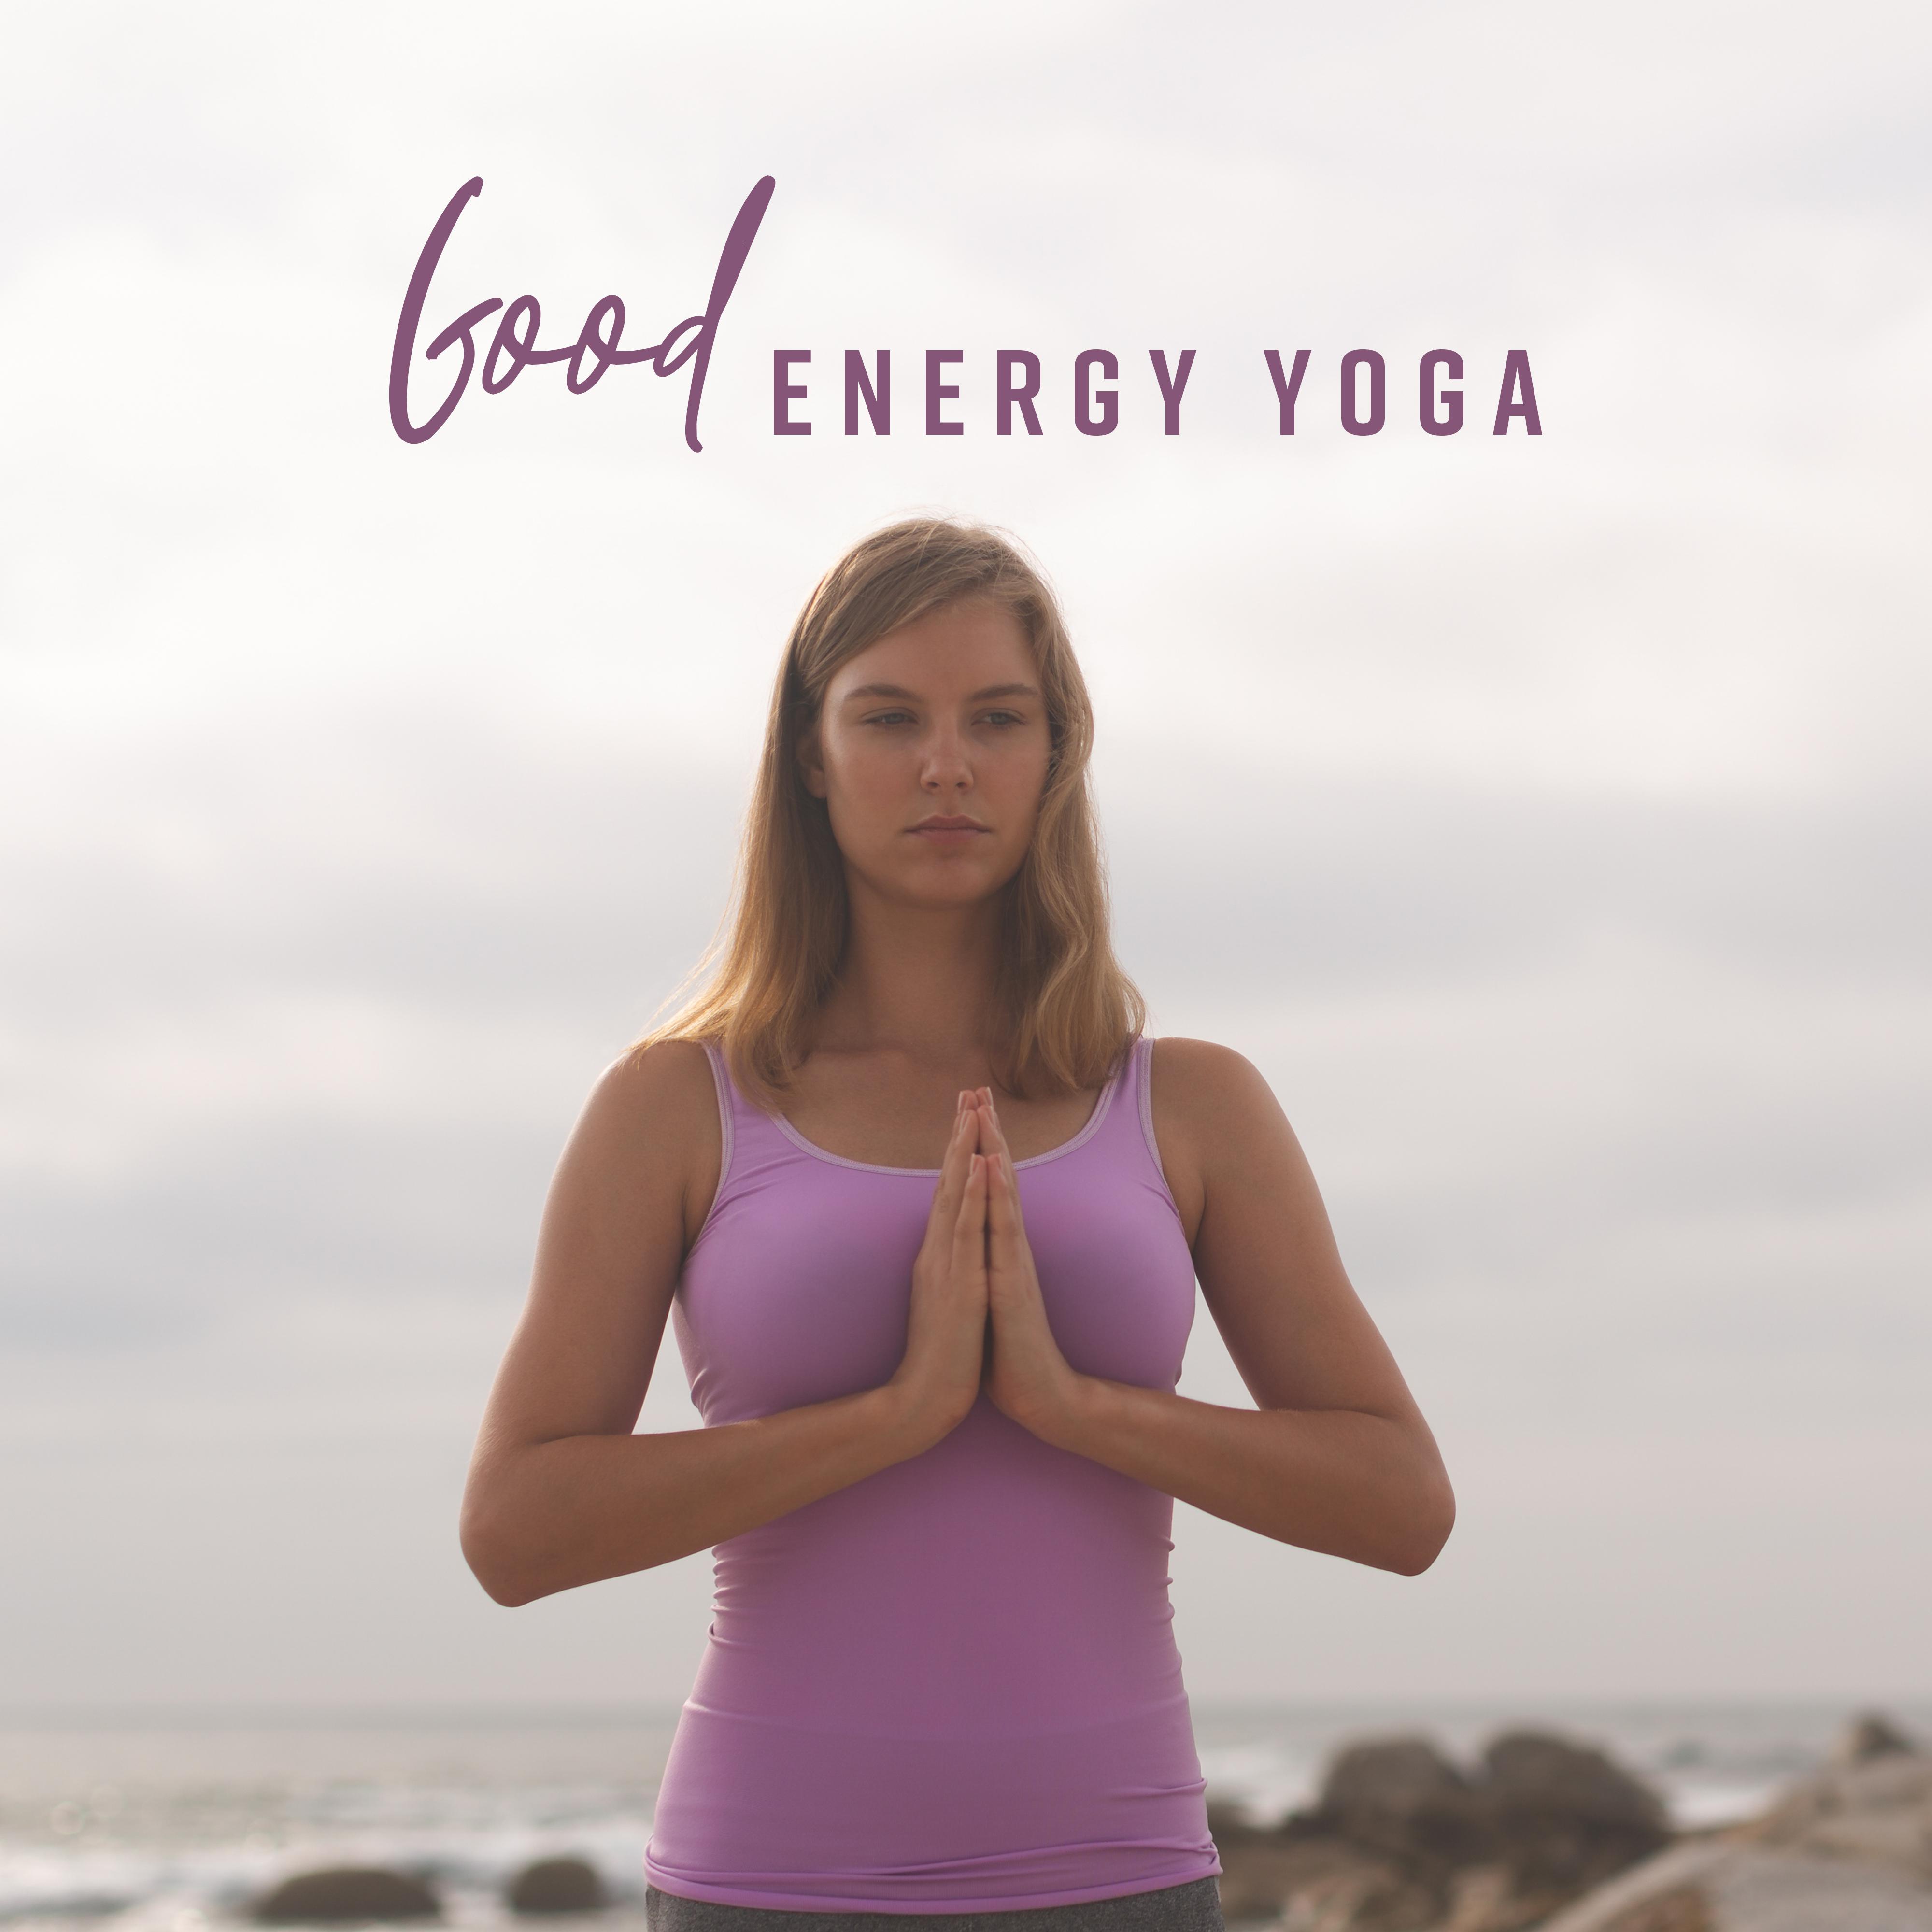 Good Energy Yoga: 2019 New Age Ambients for Increase Your Vital Energy, Meditaion & Relaxation Music, Calming & Healing Chakra